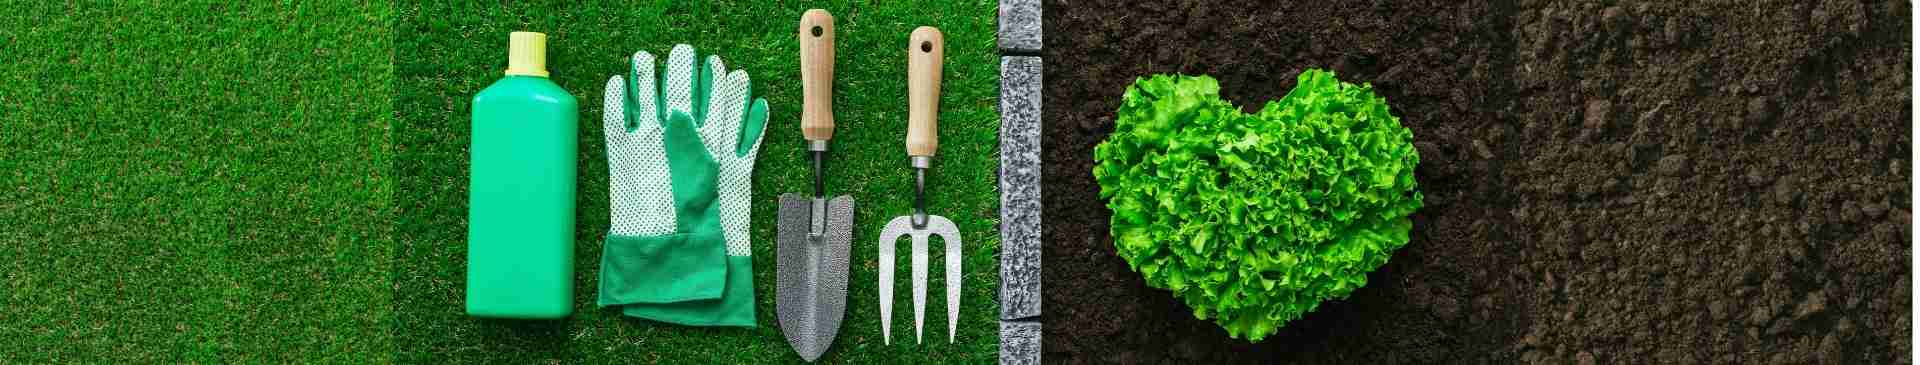 12 Ways Gardening is Good for Your Health and Wellbeing